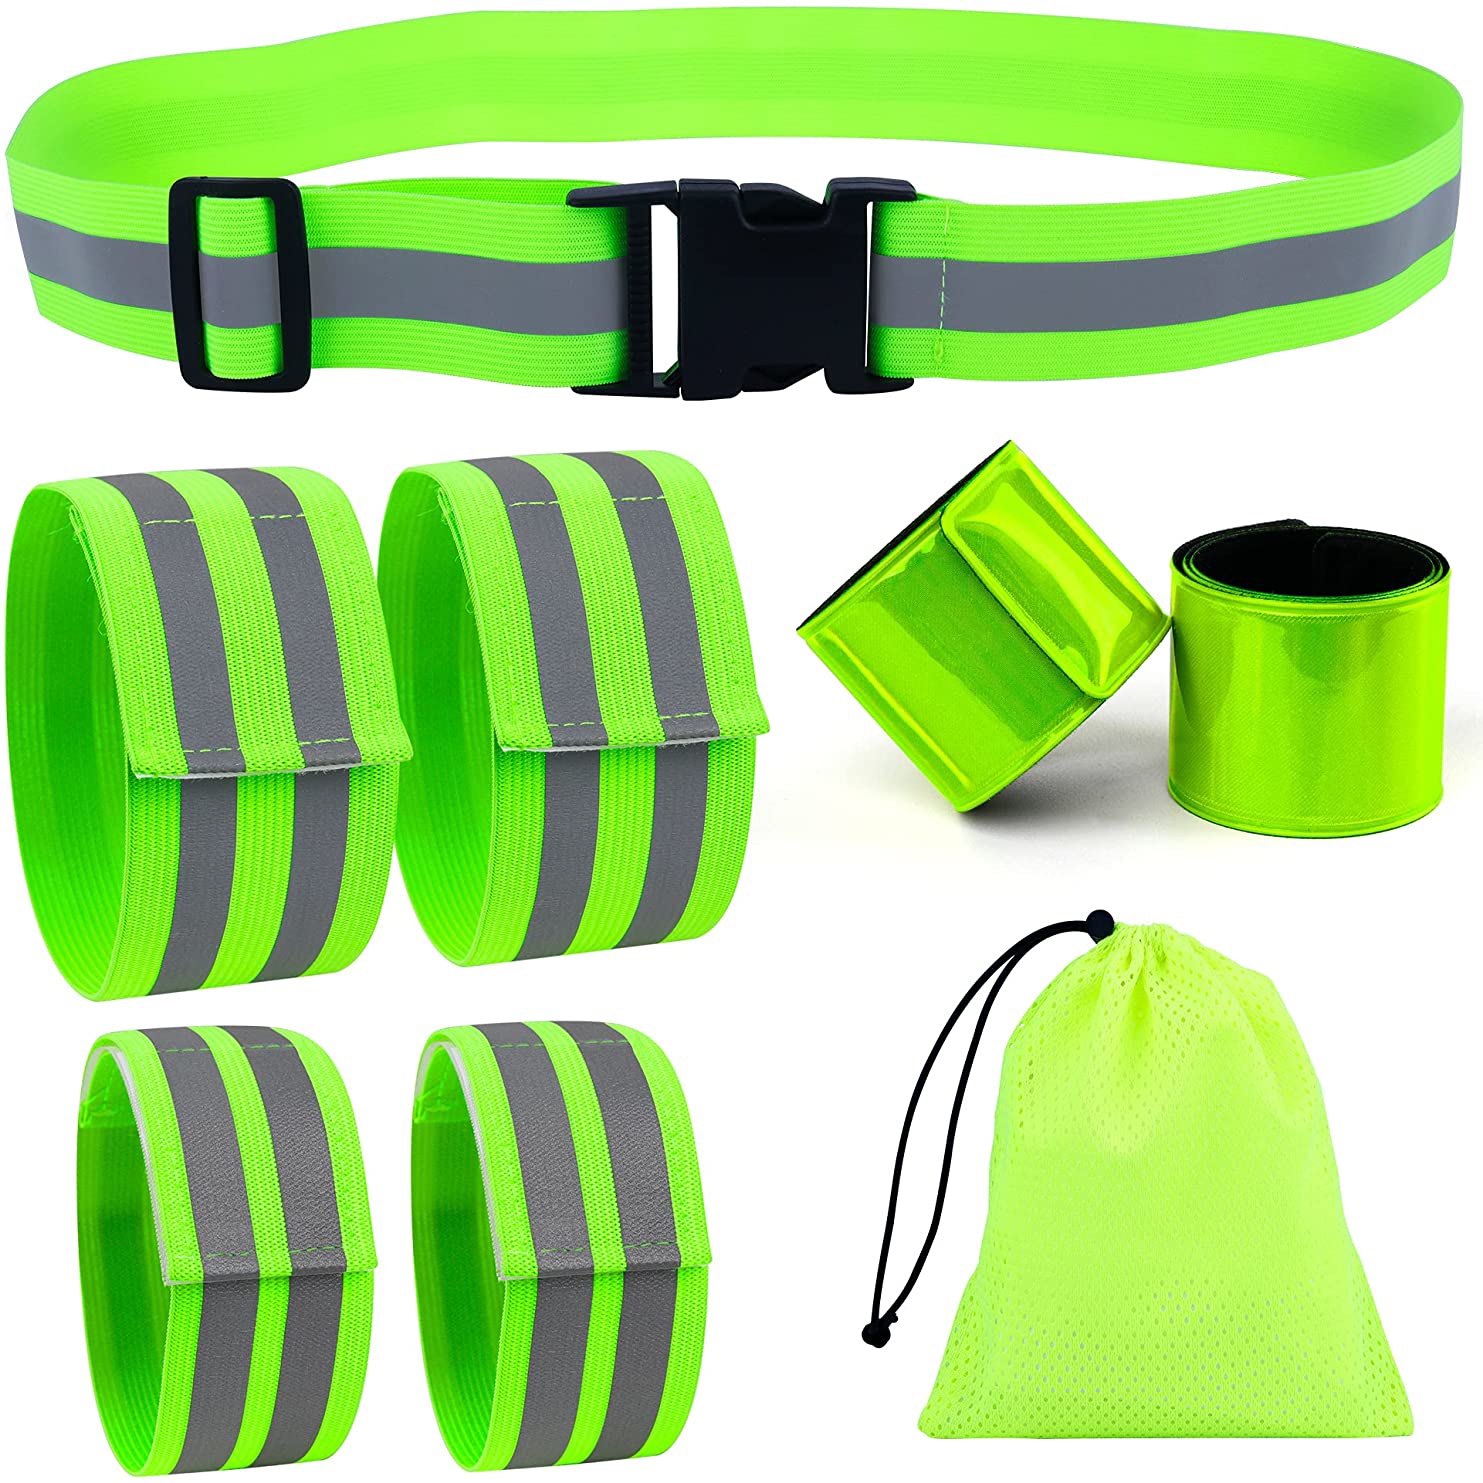 10 x High Visibility Arm Slap Strap Bands Reflective Safety Band Fluorescent Arm 